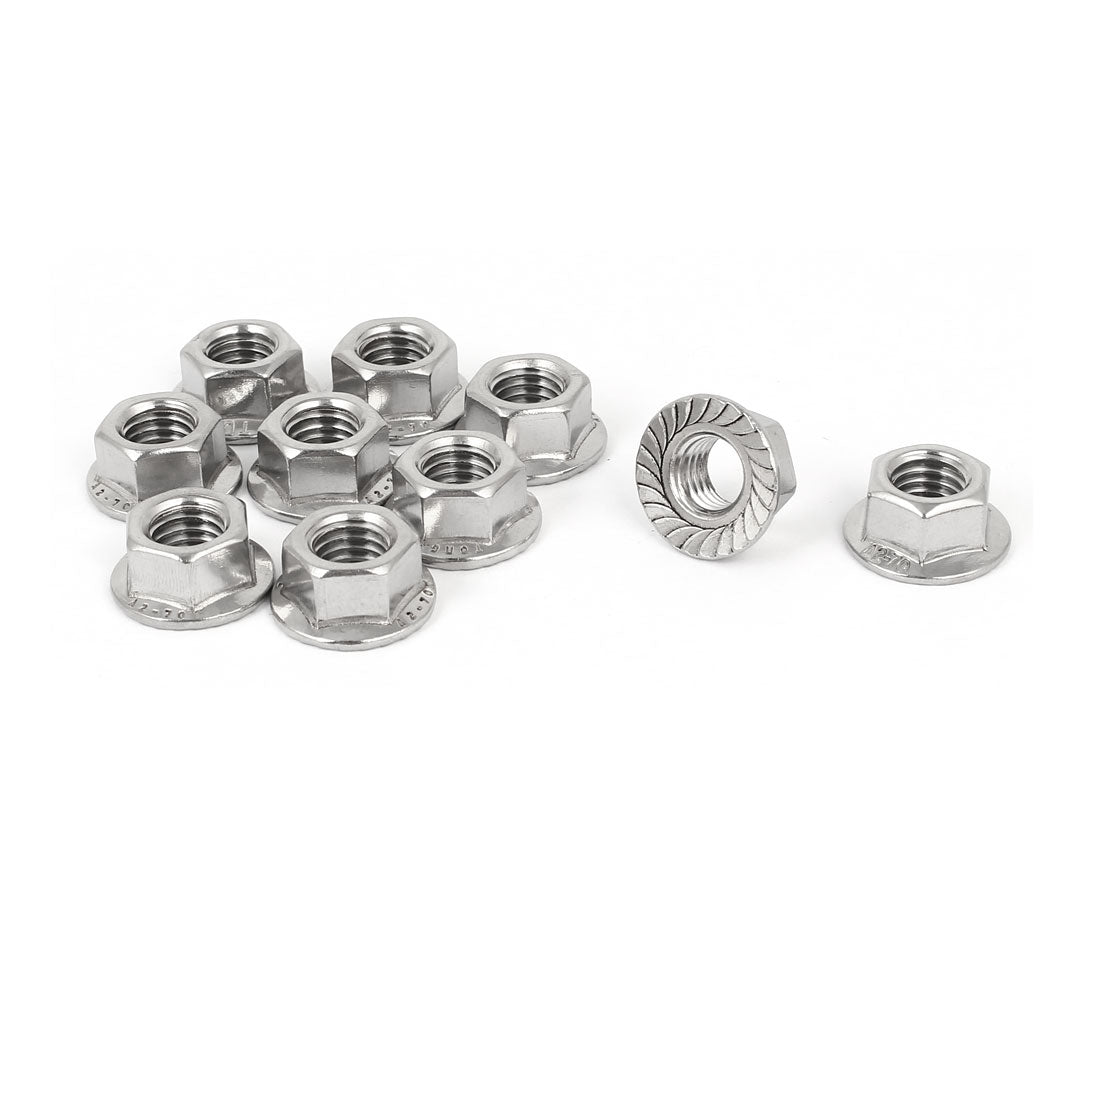 uxcell Uxcell 304 Stainless Steel Serrated Hex Flange Nuts Silver Tone M10 10pcs